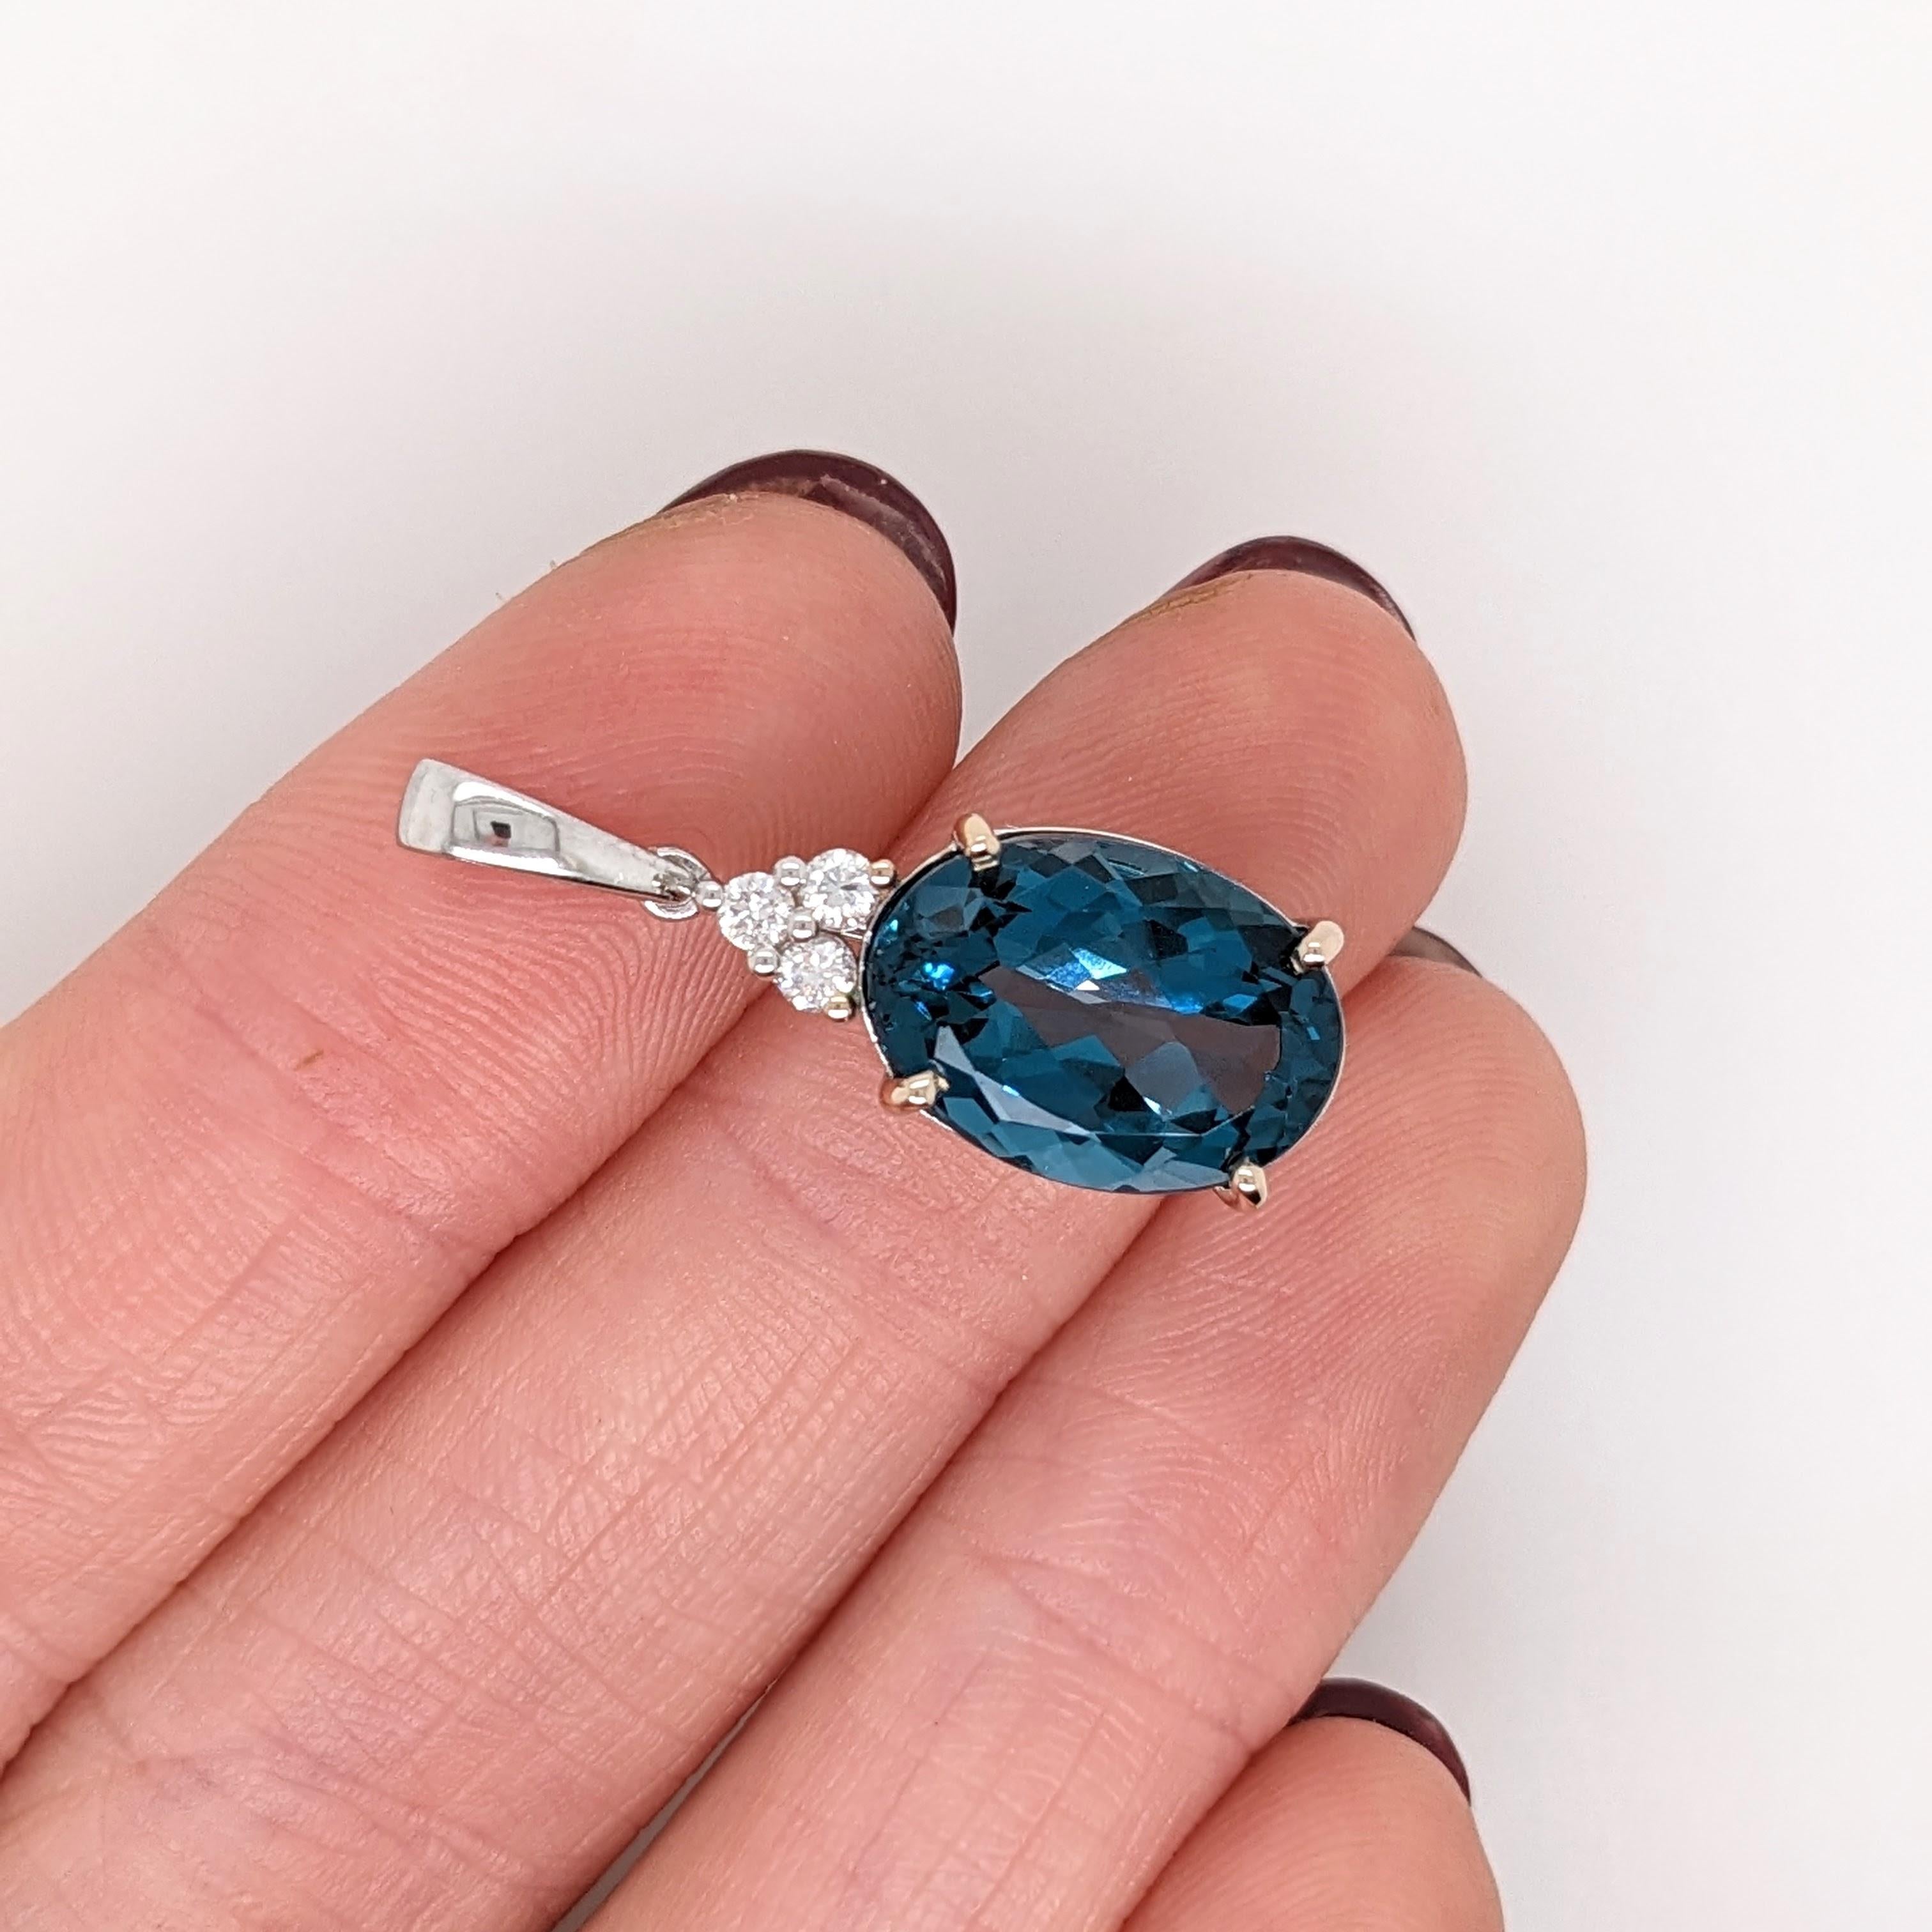 This London Blue Topaz pendant features a gorgeous unique shade of vibrant blue and beautiful clarity with an amazing sparkle. This pendant makes a stunning statement piece made in 14k white gold with a triad of natural earth-mined diamonds that